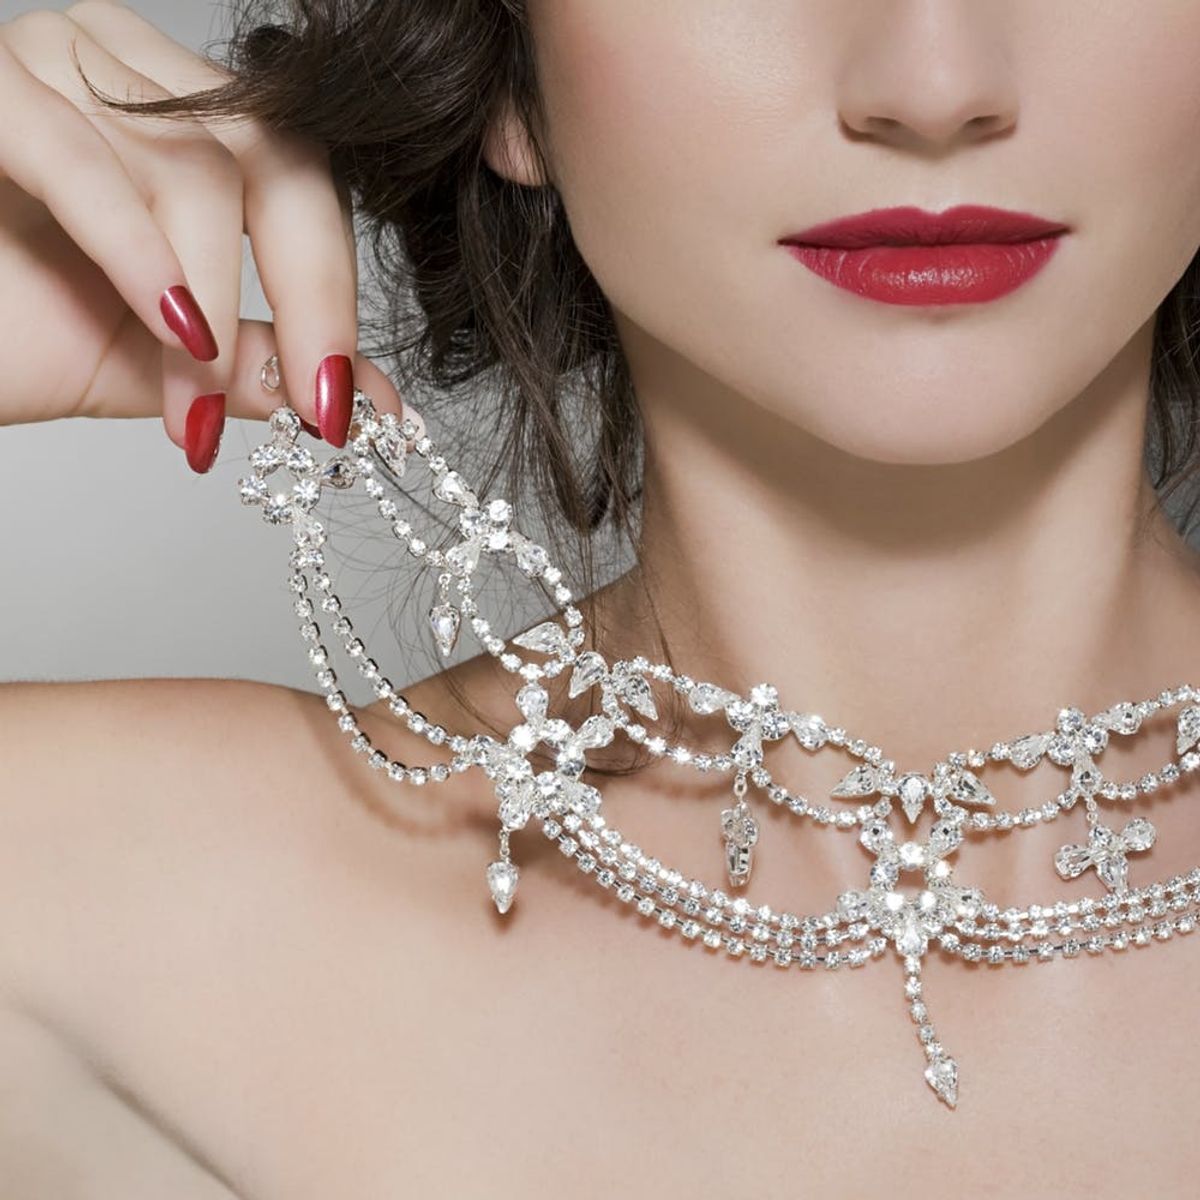 The Most Commonly Googled Piece of Jewelry Might Surprise You